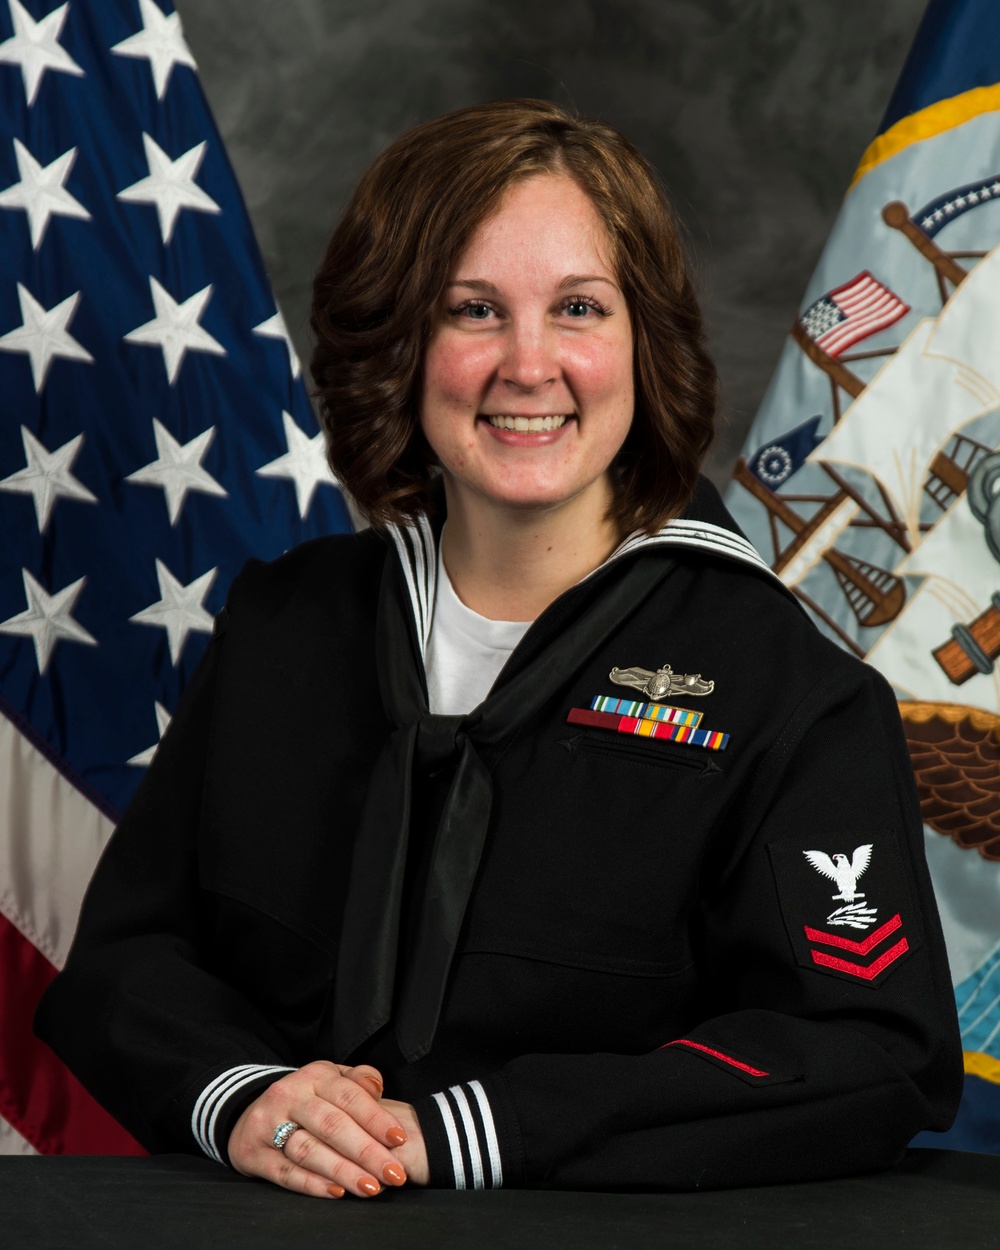 West Lafayette Native Receives “Junior Sailor of the Year” Honors at Japan-based Command